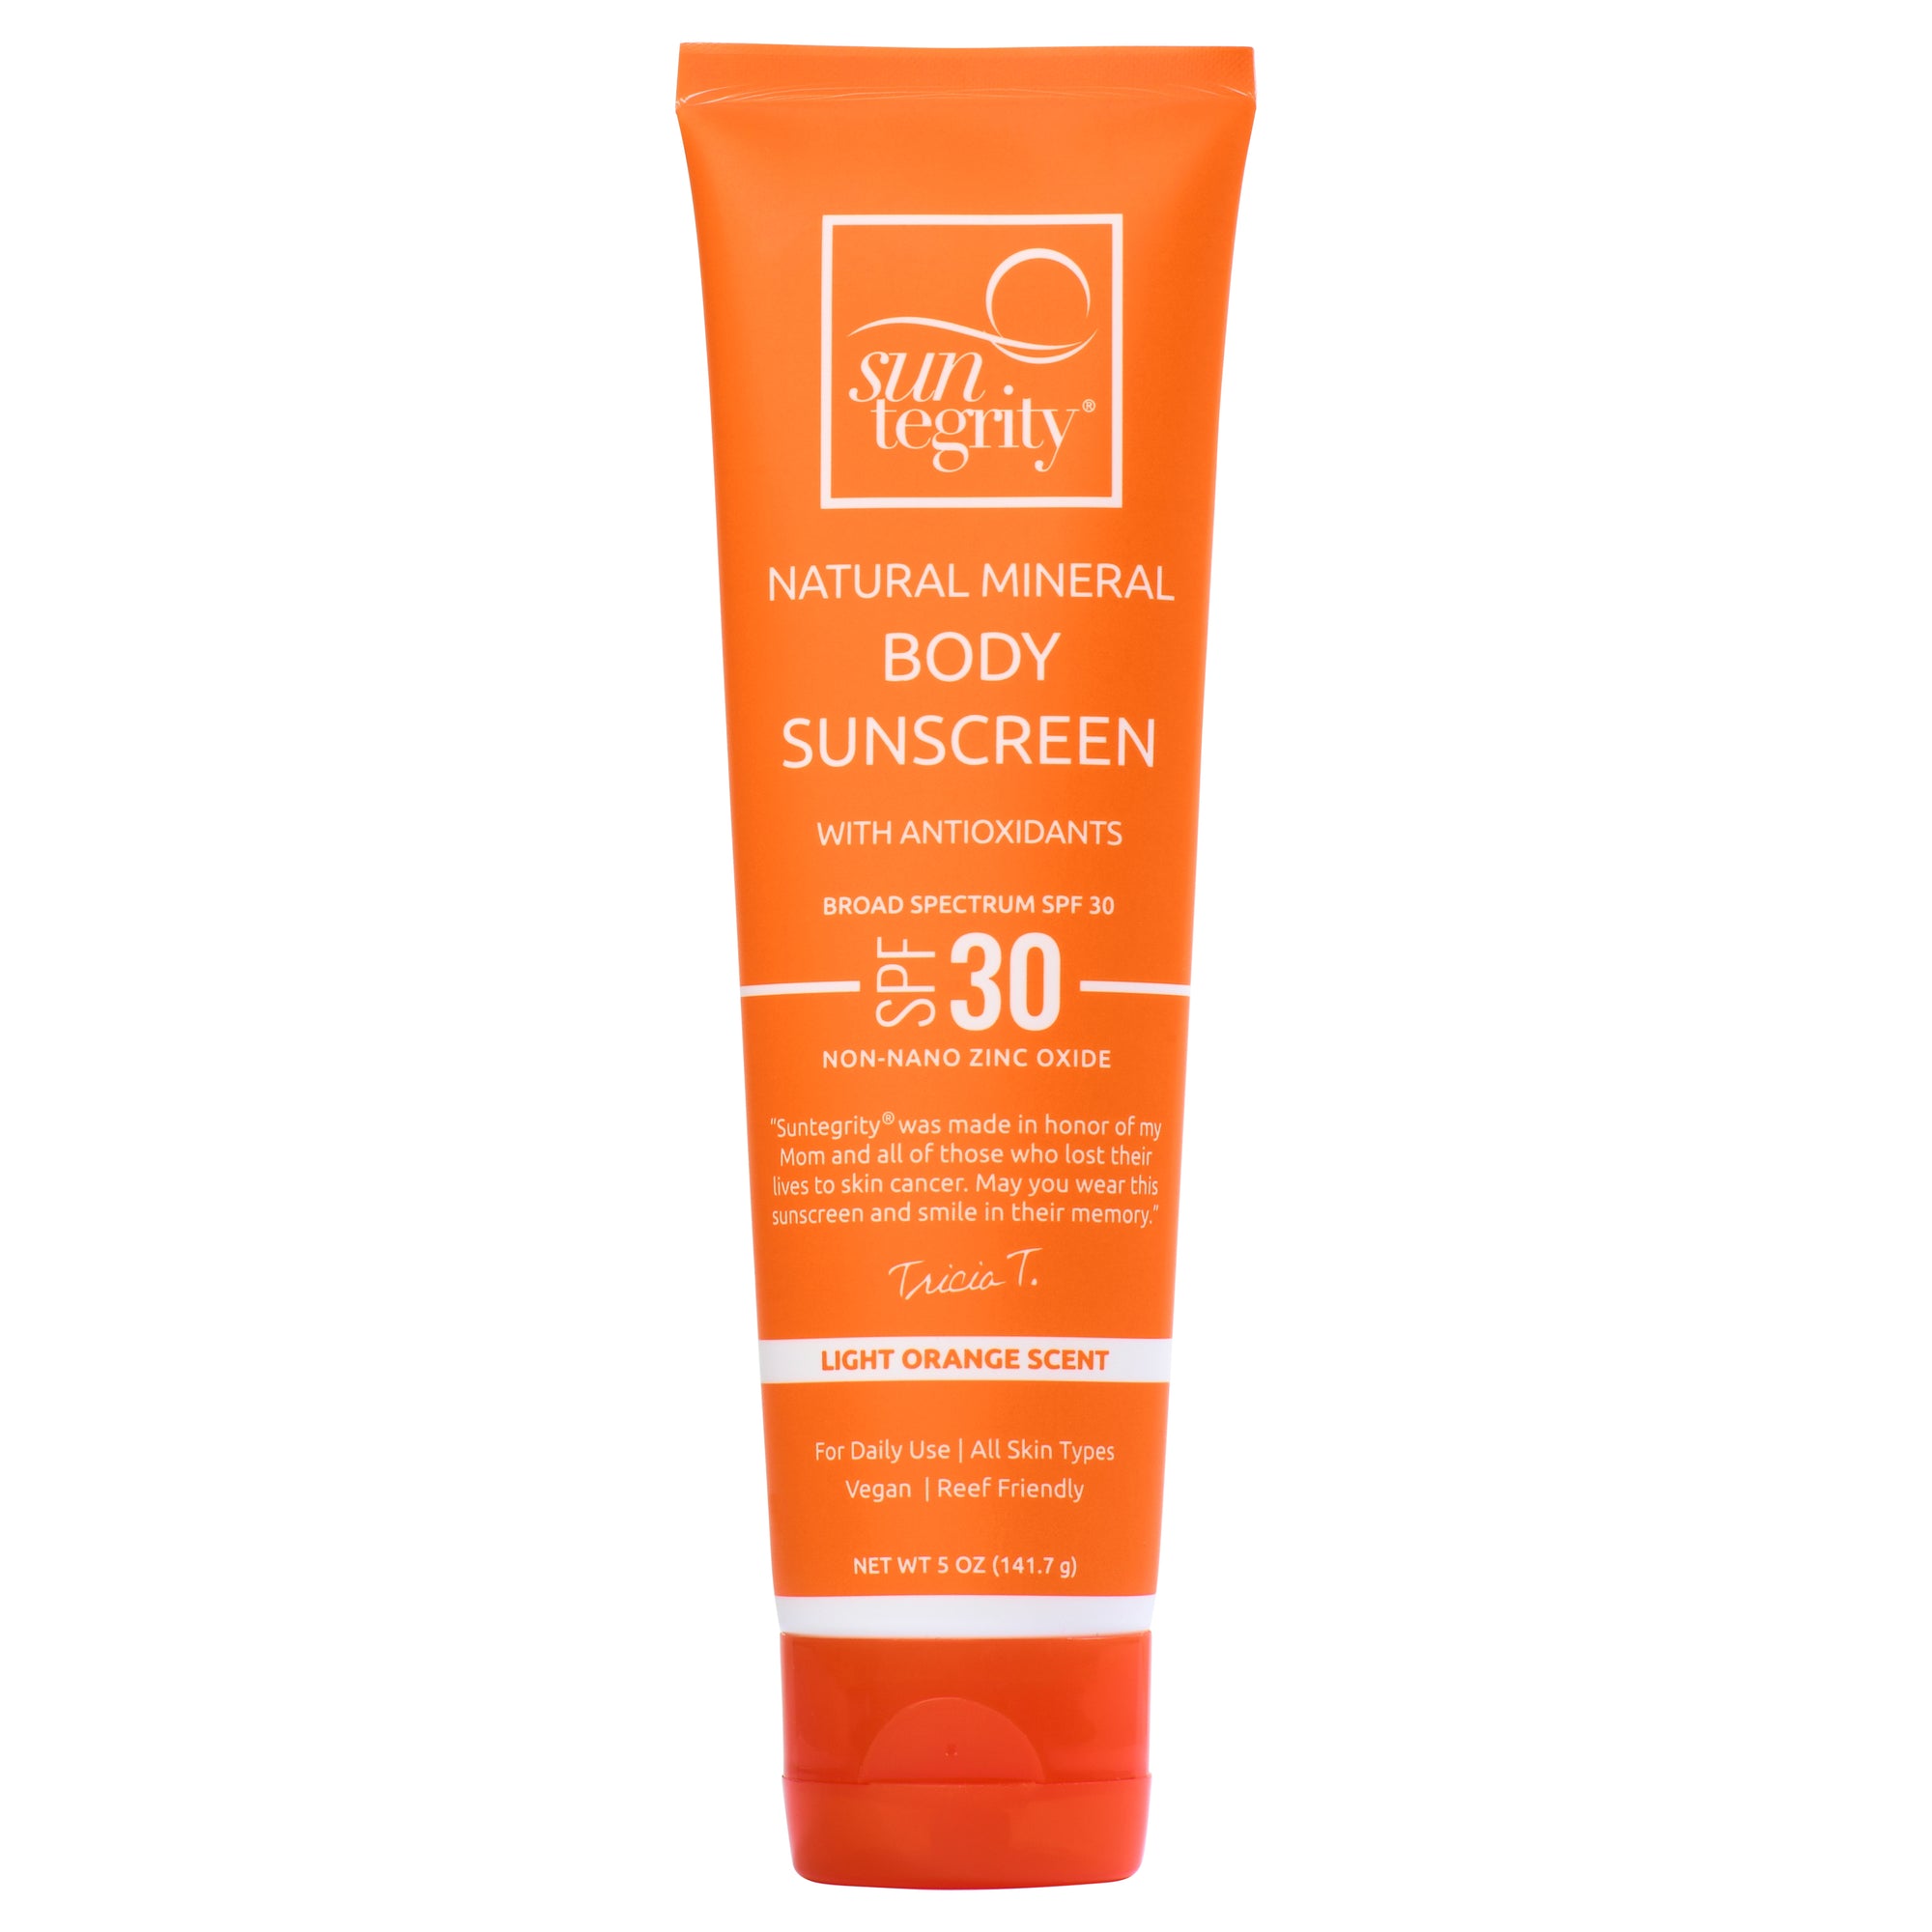 Natural Mineral Sunscreen for Body - Broad Spectrum SPF 30 - 5oz